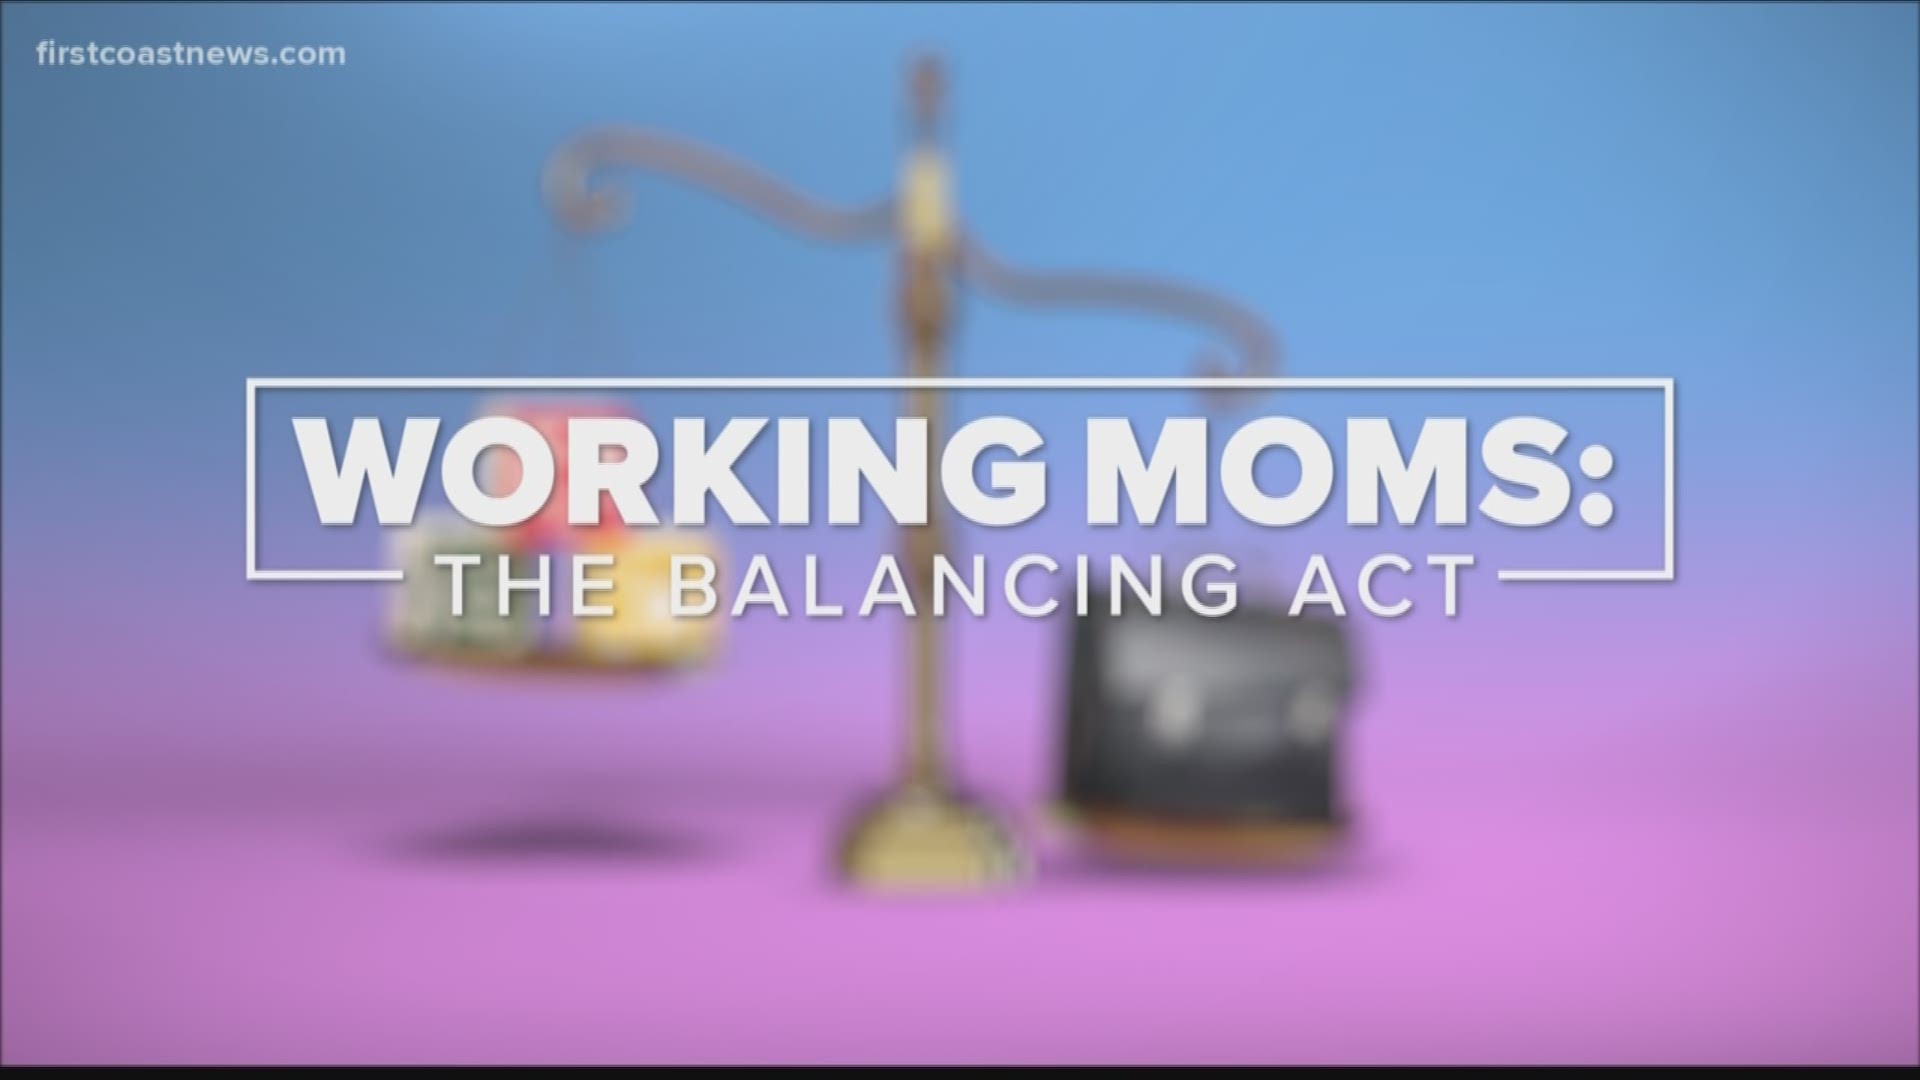 The demands of being a working mom can become overwhelming. Starting Nov. 4, we enter the homes of busy moms across the First Coast tackling difficult realities.